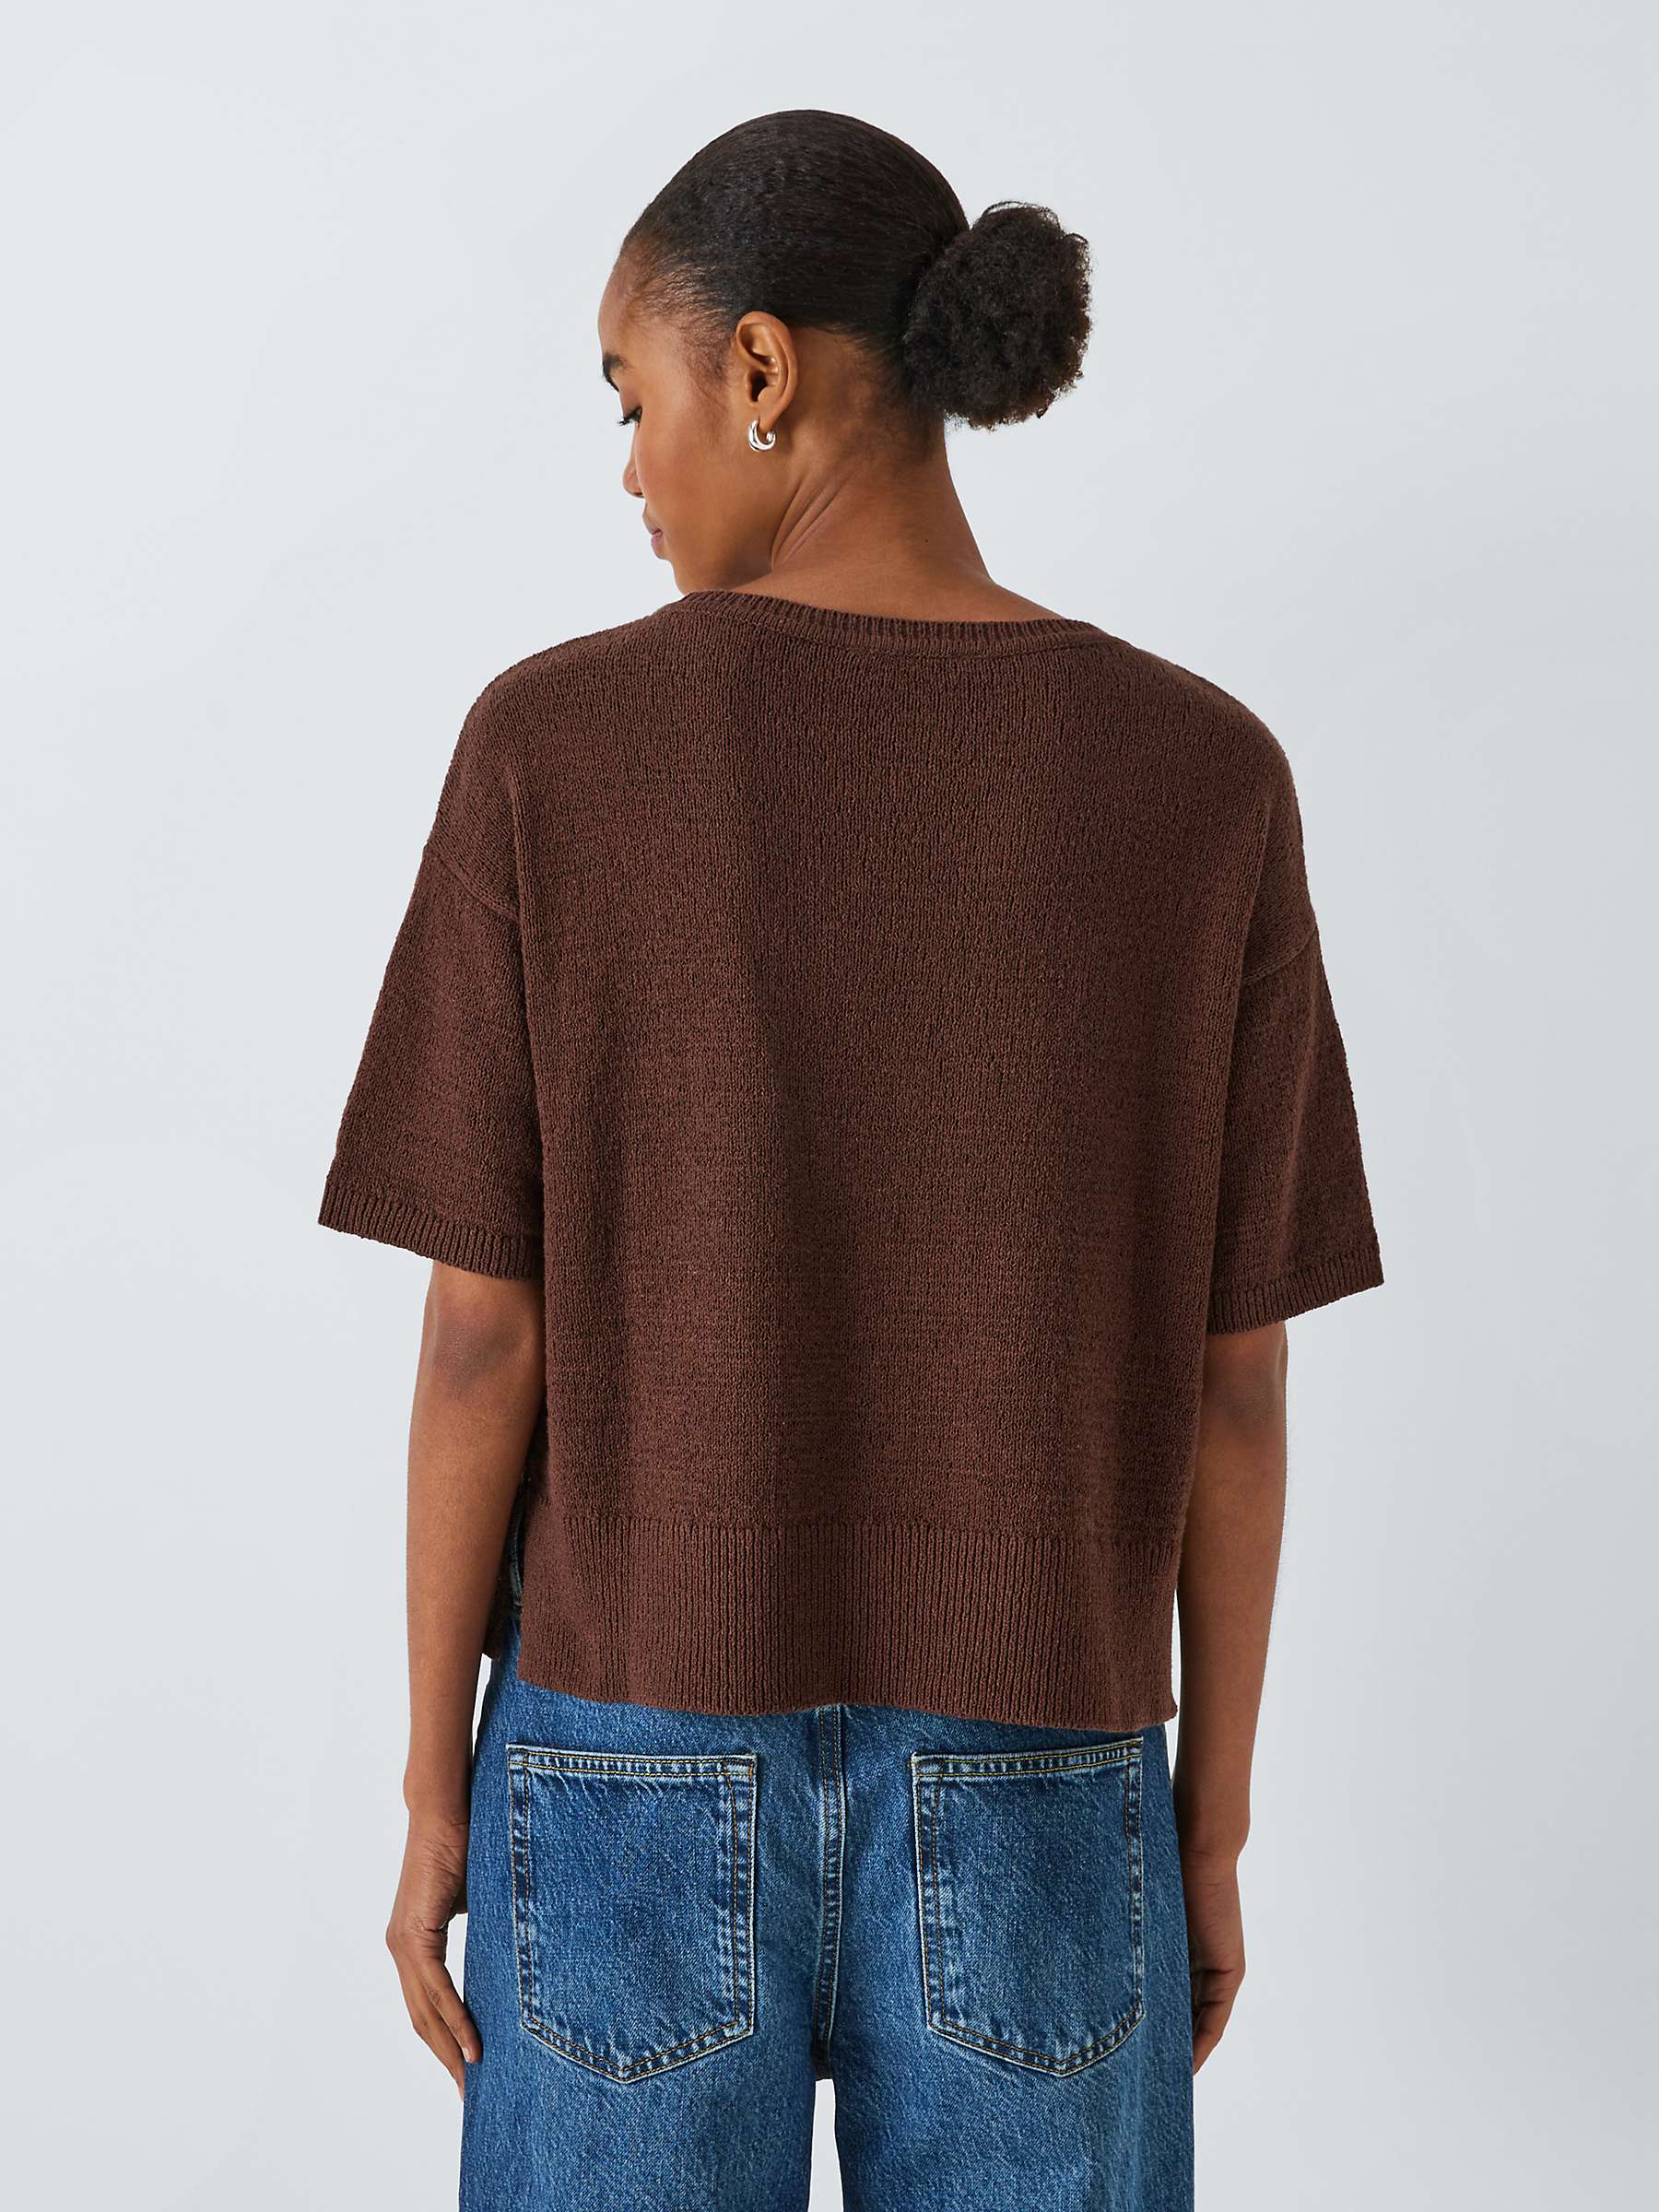 Buy John Lewis ANYDAY Knitted T-Shirt Top, Brown Online at johnlewis.com